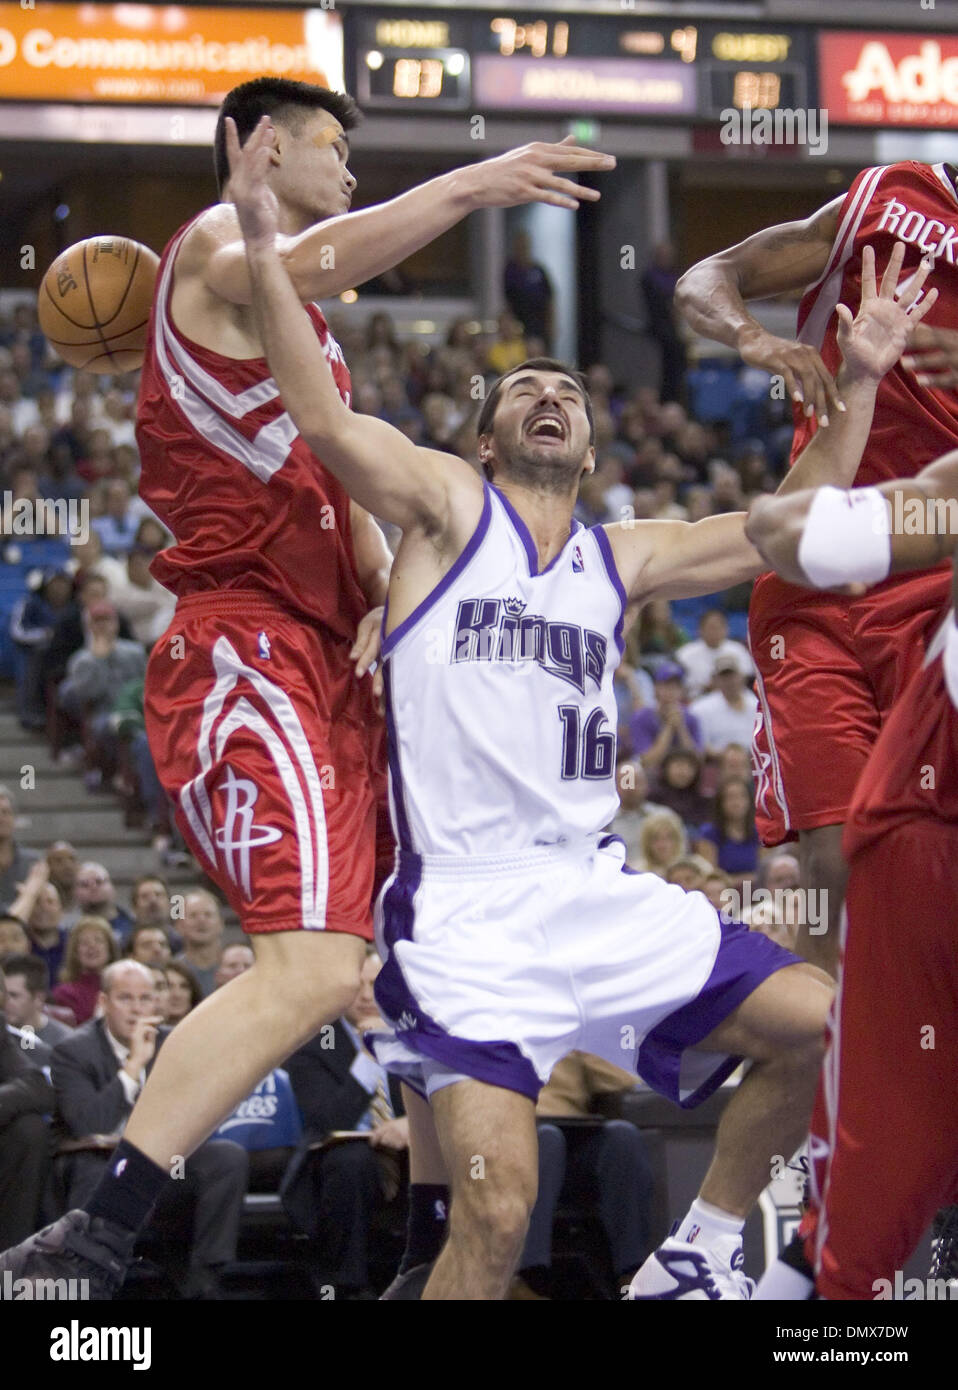 Dec 08, 2005; Sacramento, CA, USA; Sacramento Kings Peja Stojakovic loses control of ball as he drives to the basket in the 4th period against Houston Rockets Yao Ming in their 106-95 loss at Arco Arena in Sacramento, California on December 8, 2005. Mandatory Credit: Photo by Paul Kitagaki Jr./Sacramento Bee /ZUMA Press. (©) Copyright 2005 by Sacramento Bee Stock Photo